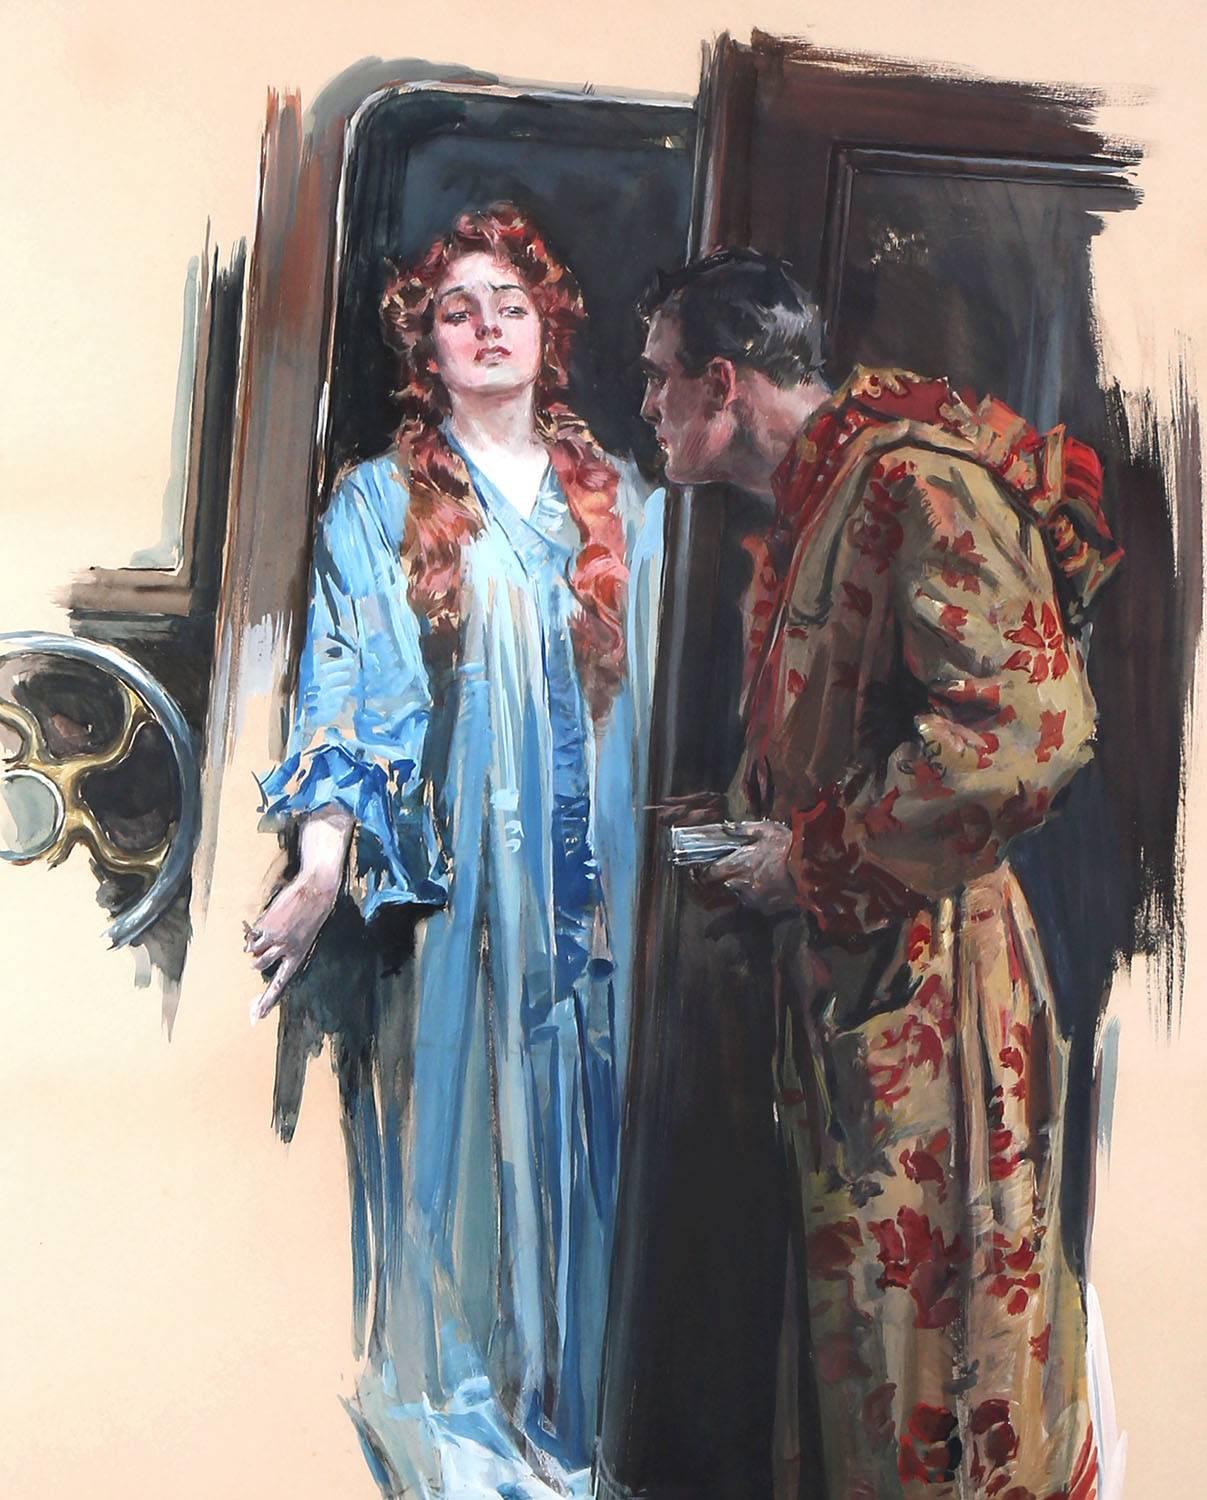 A large early artwork by Howard Chandler Christy used as a book plate in 